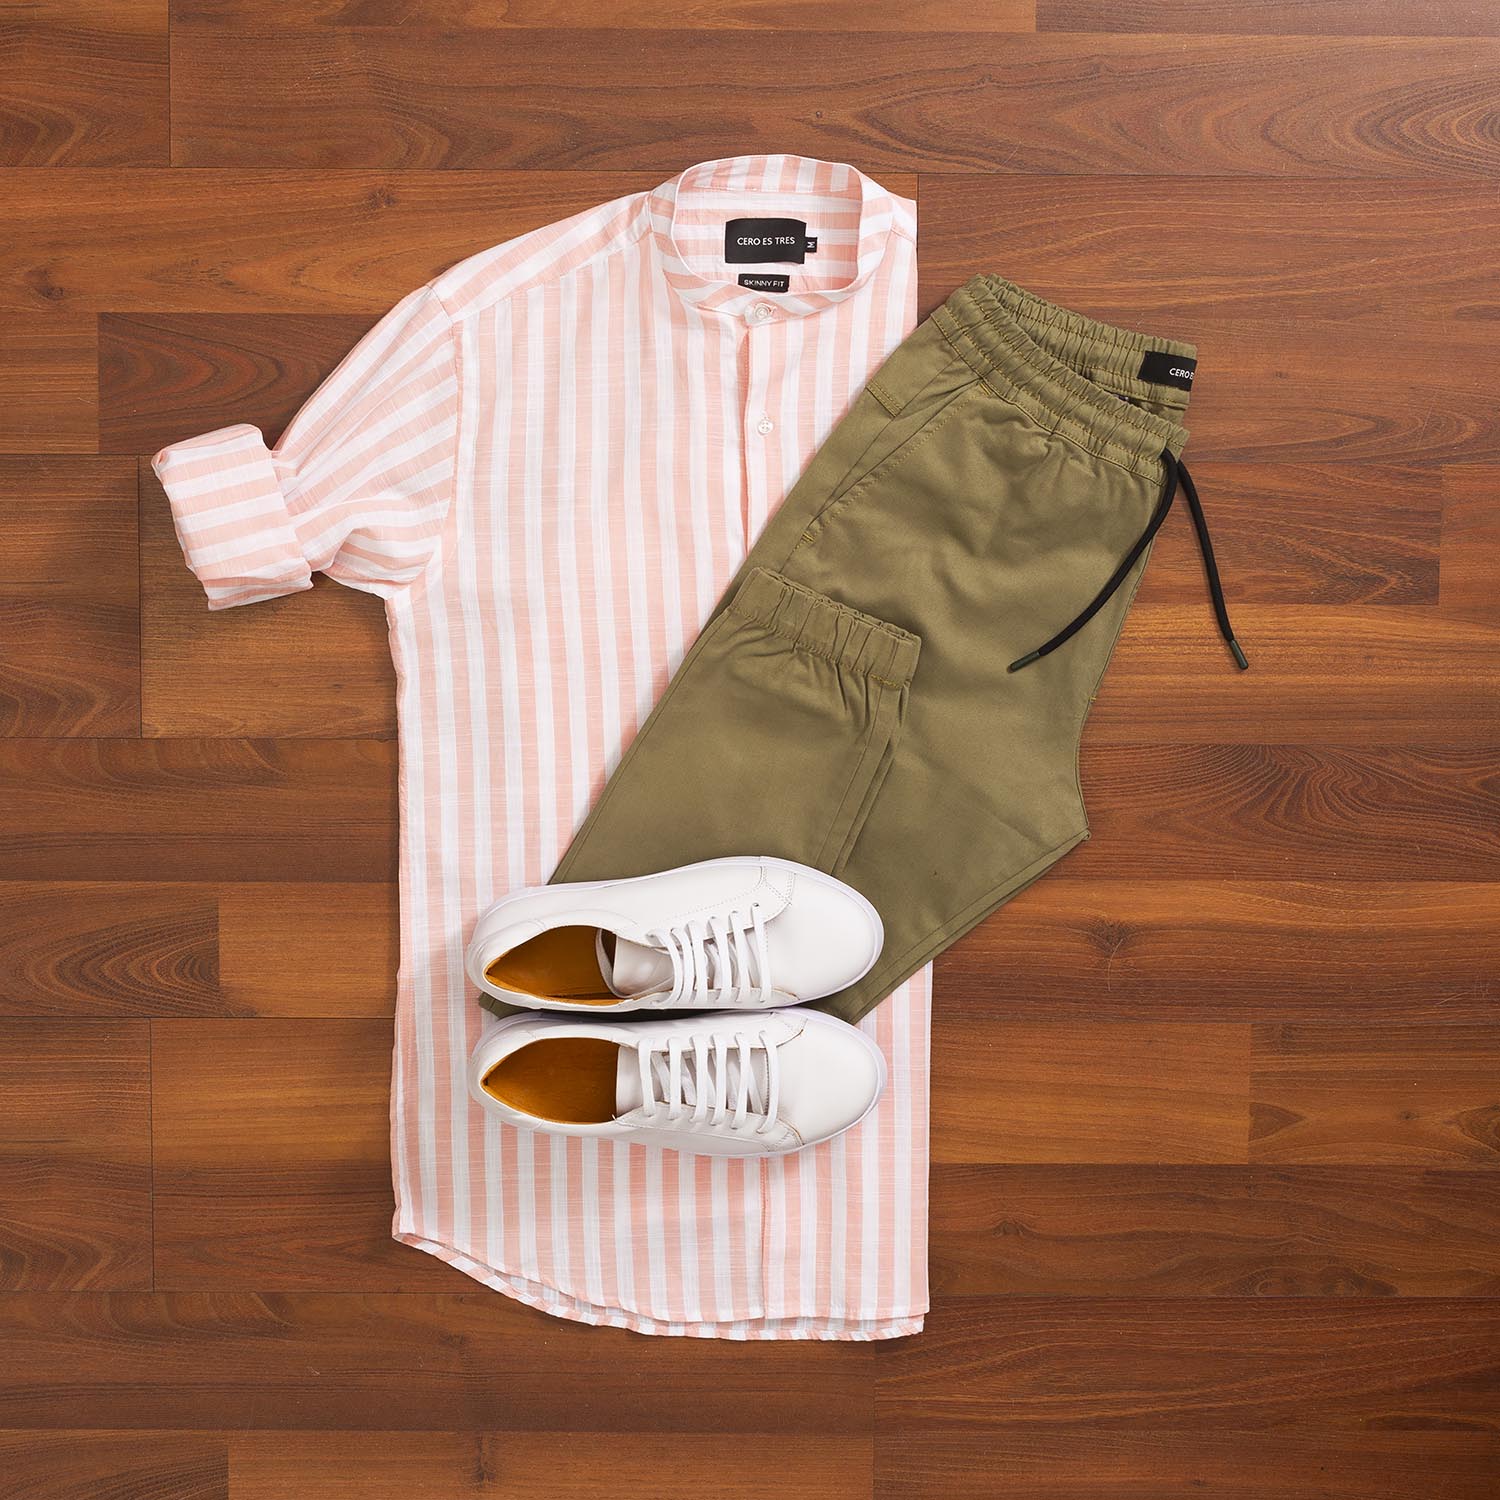 OUTFIT CERO 410